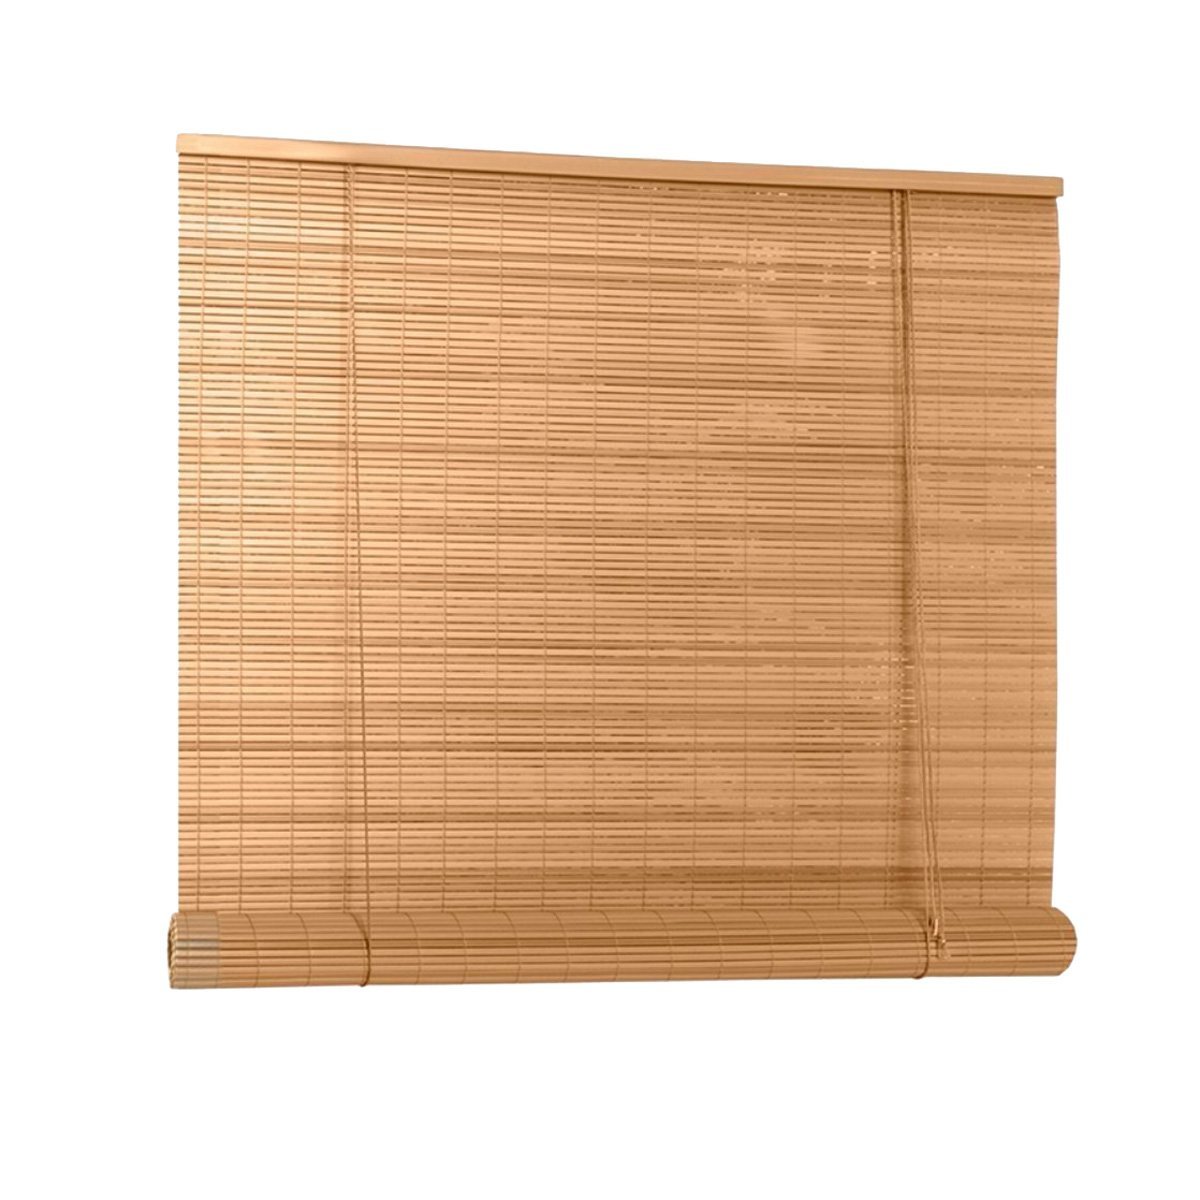 Lewis Hyman Roll-Up Window Blind 30-inches by 72-inches (Woodgrain)